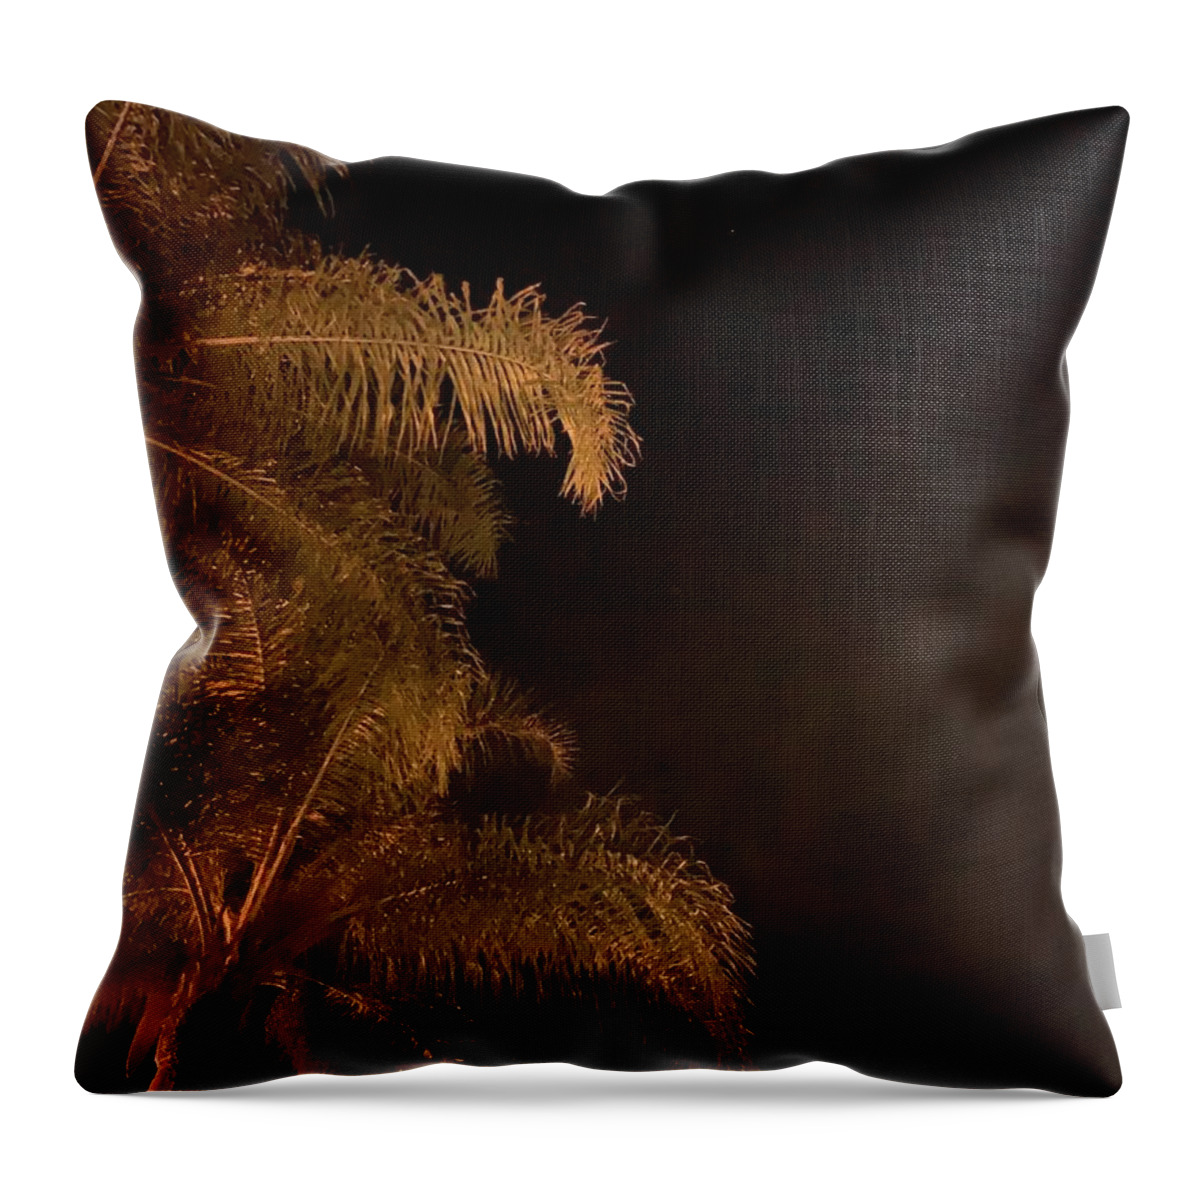 Love Throw Pillow featuring the photograph In Love And Light by Tiesa Wesen